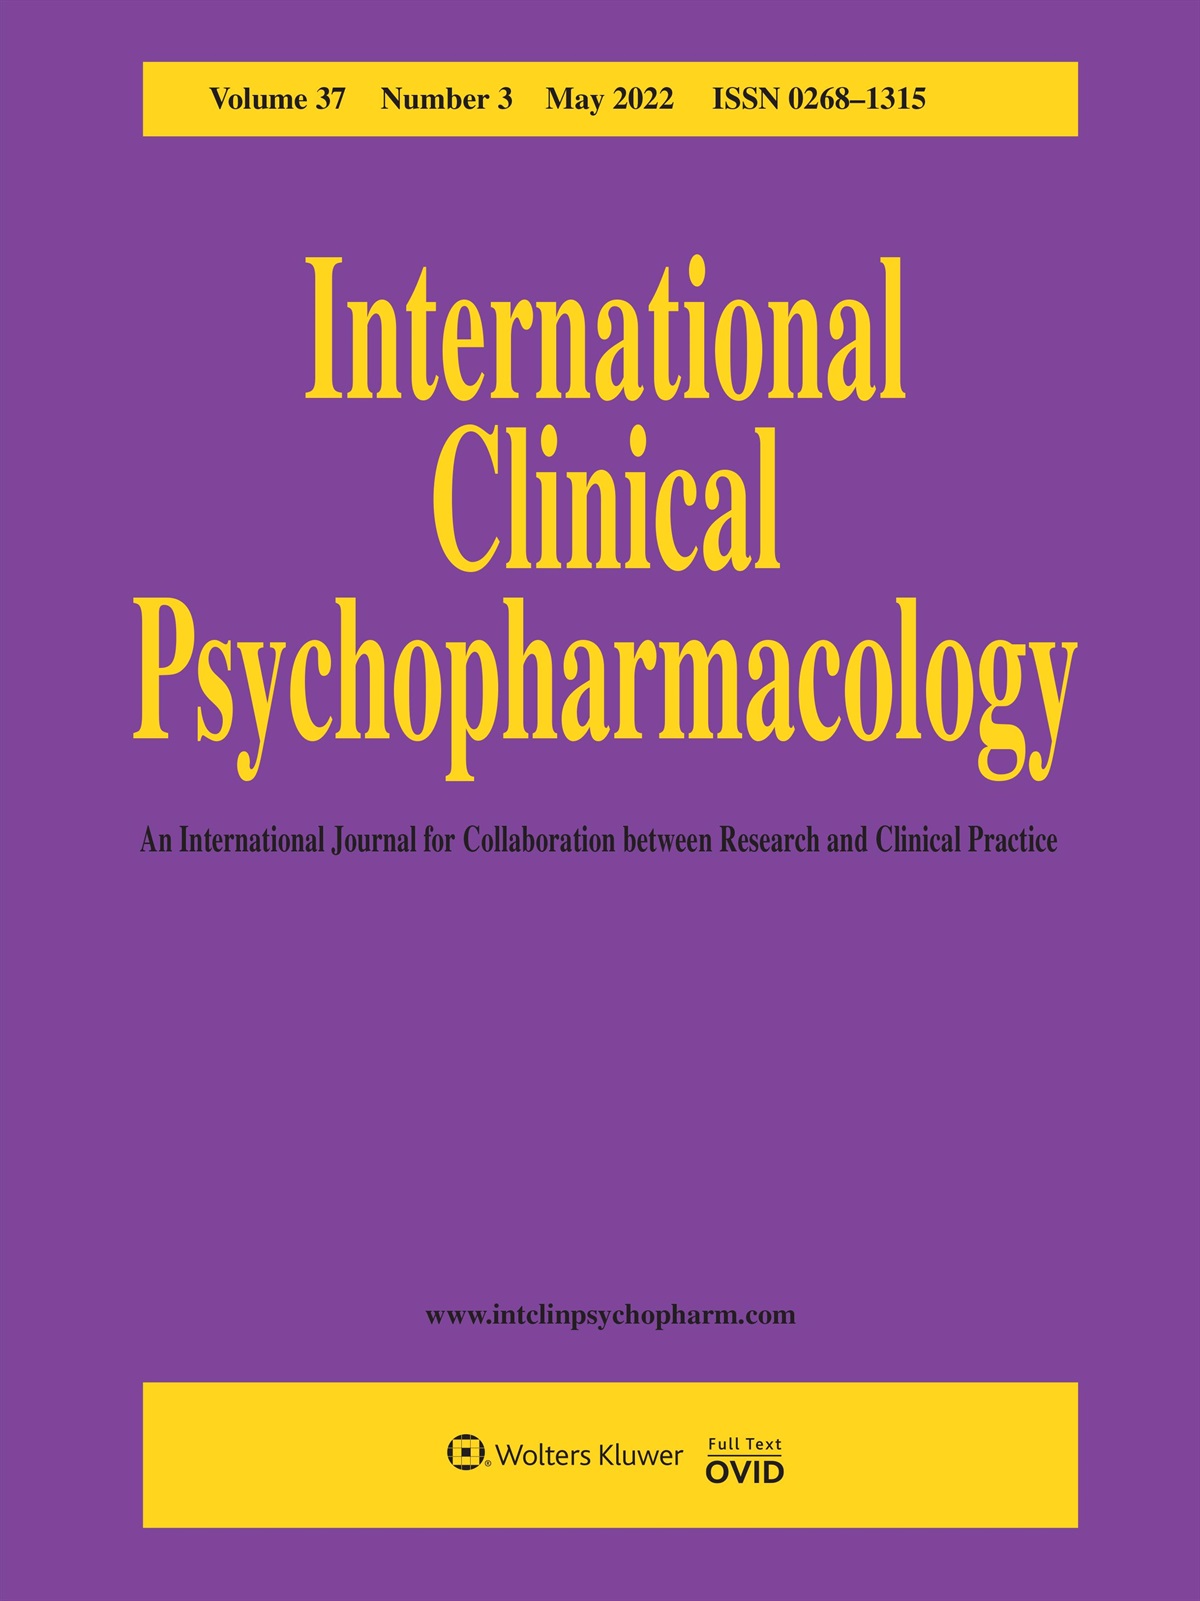 Psychopharmacology: past, present and future